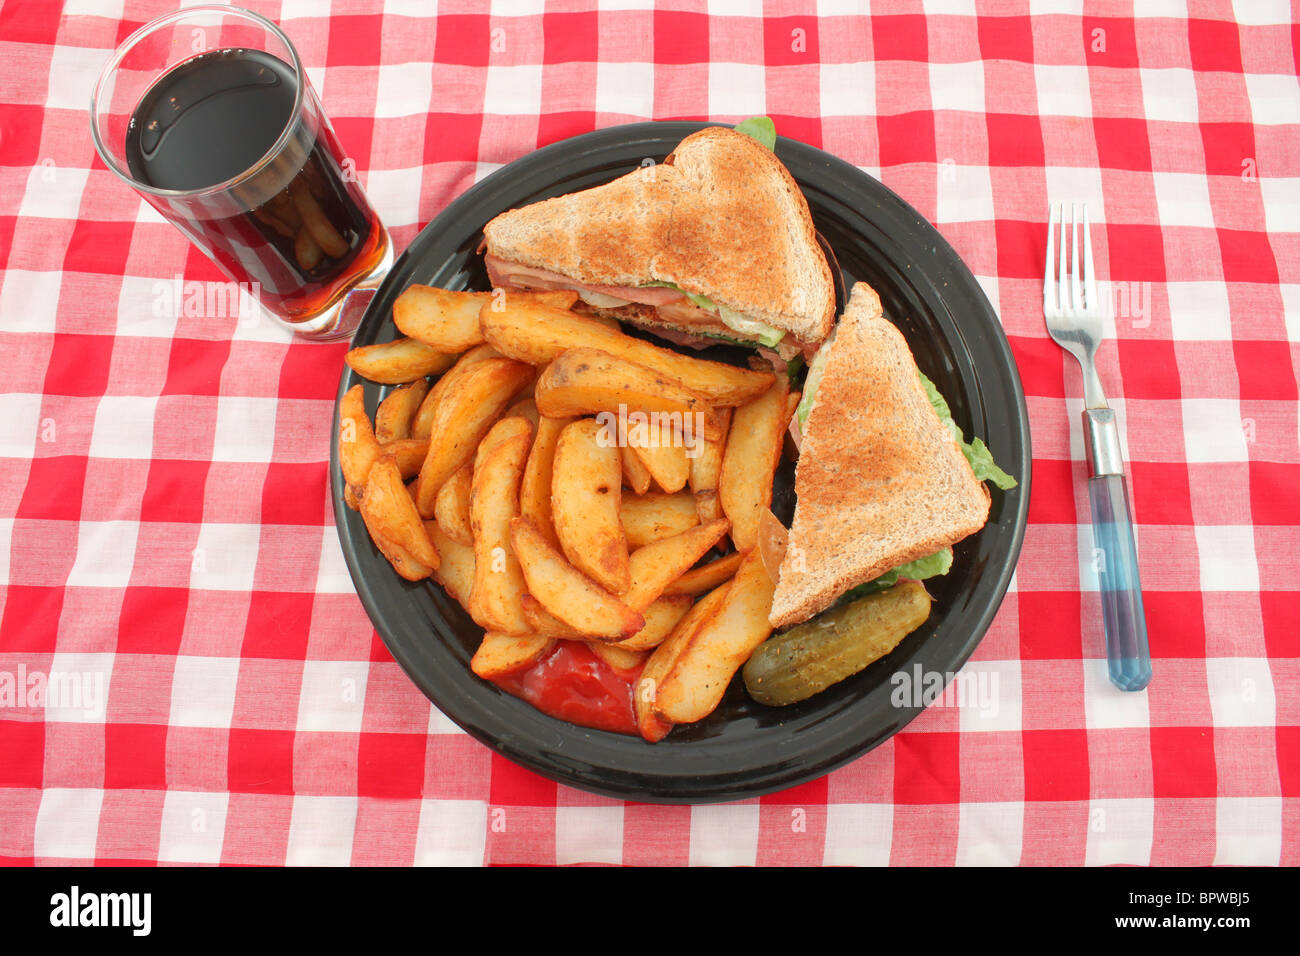 A plate of a bacon, lettuce and tomato sandwich also known as the BLT , french fried potato wedges, a pickle and catsup Stock Photo